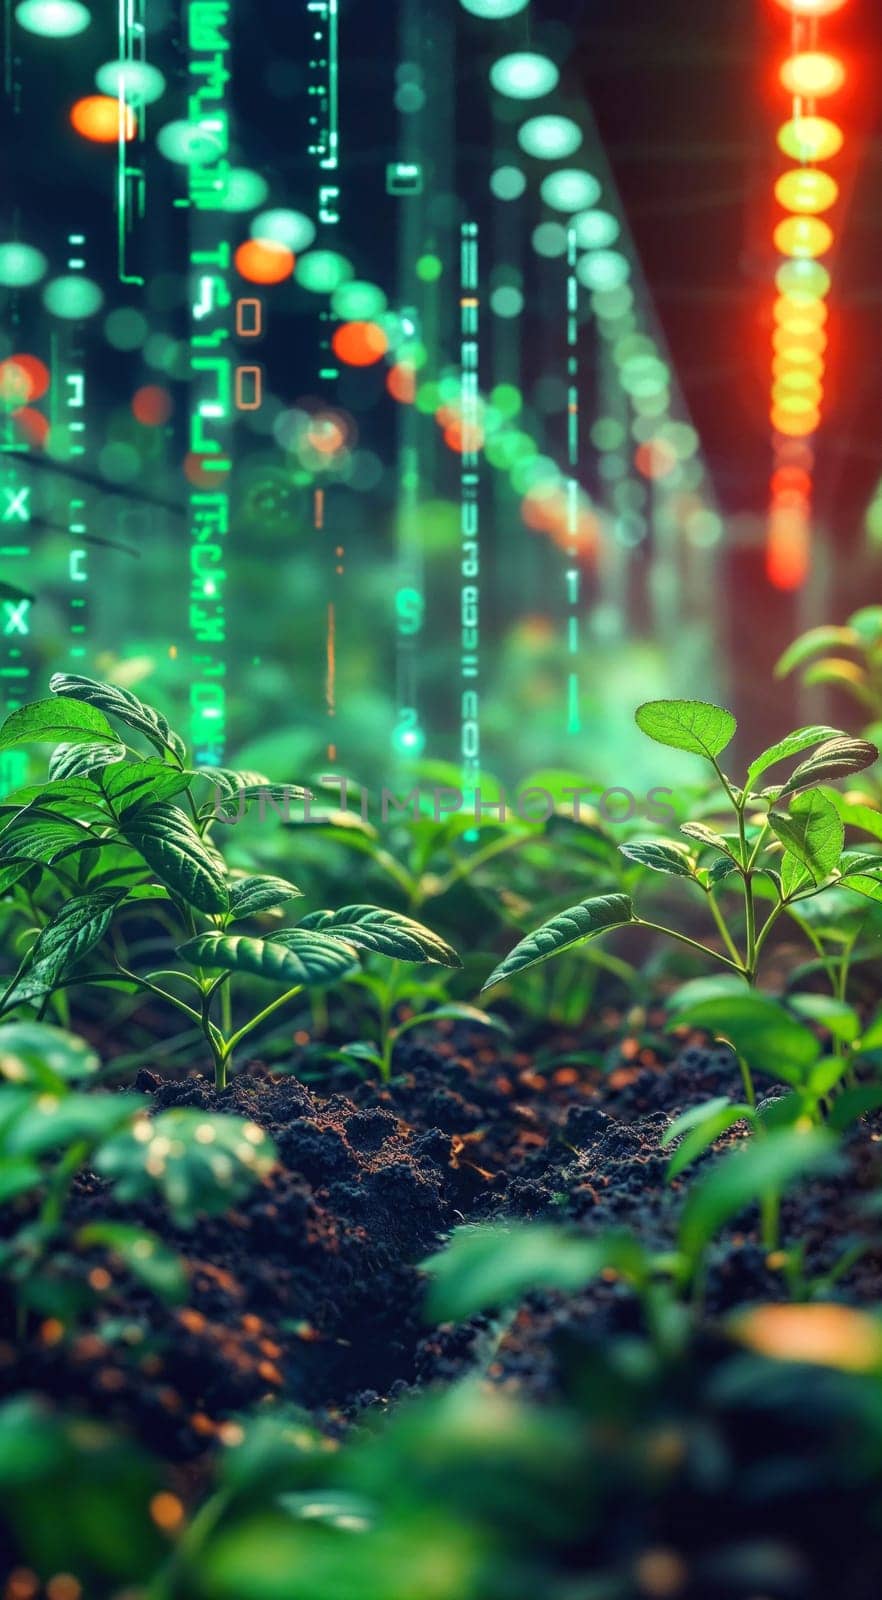 A green plant grows in the middle of a field, surrounded by data visualizations and numbers, symbolizing a technological moment for agriculture.